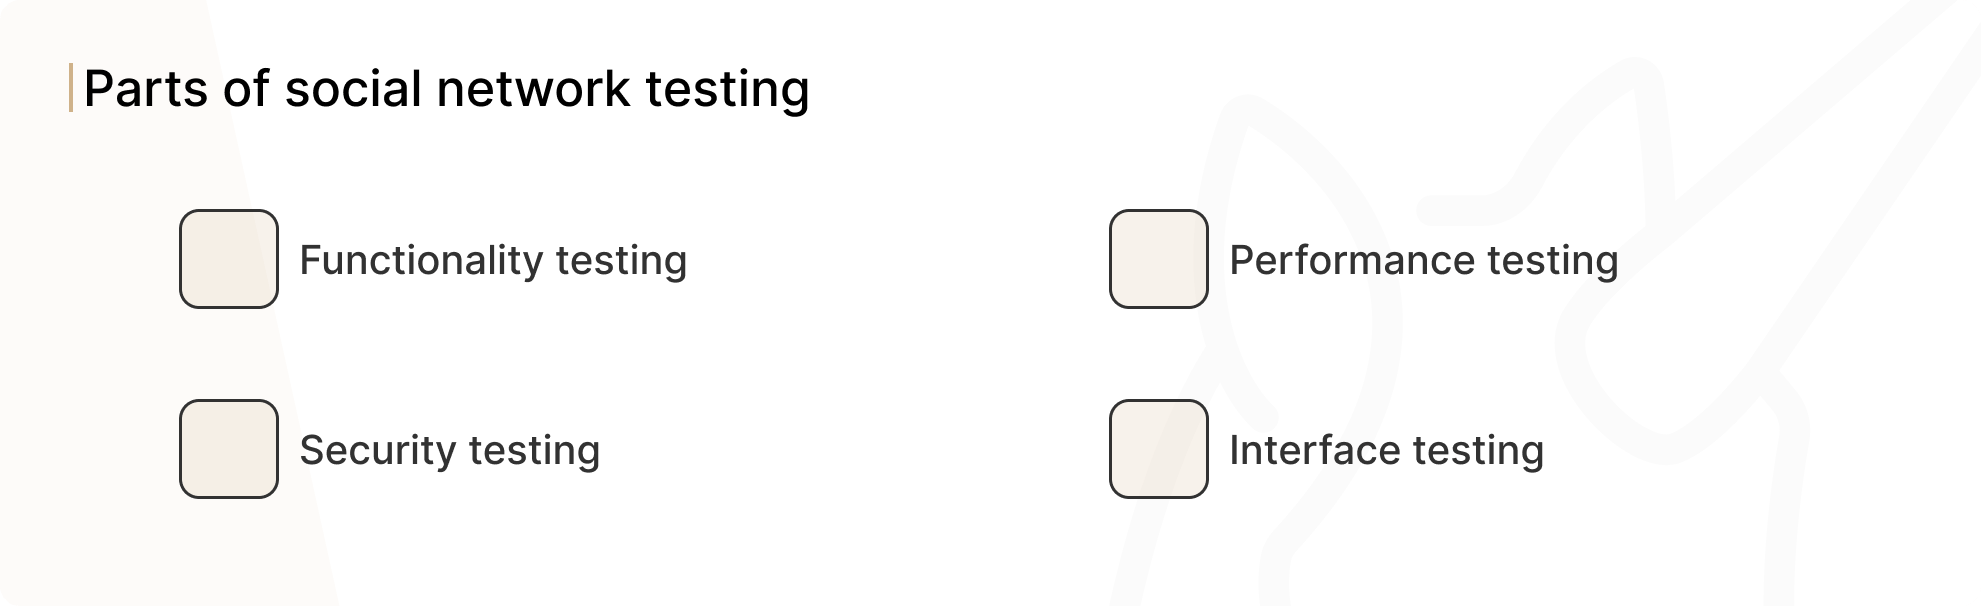 Parts of social network testing